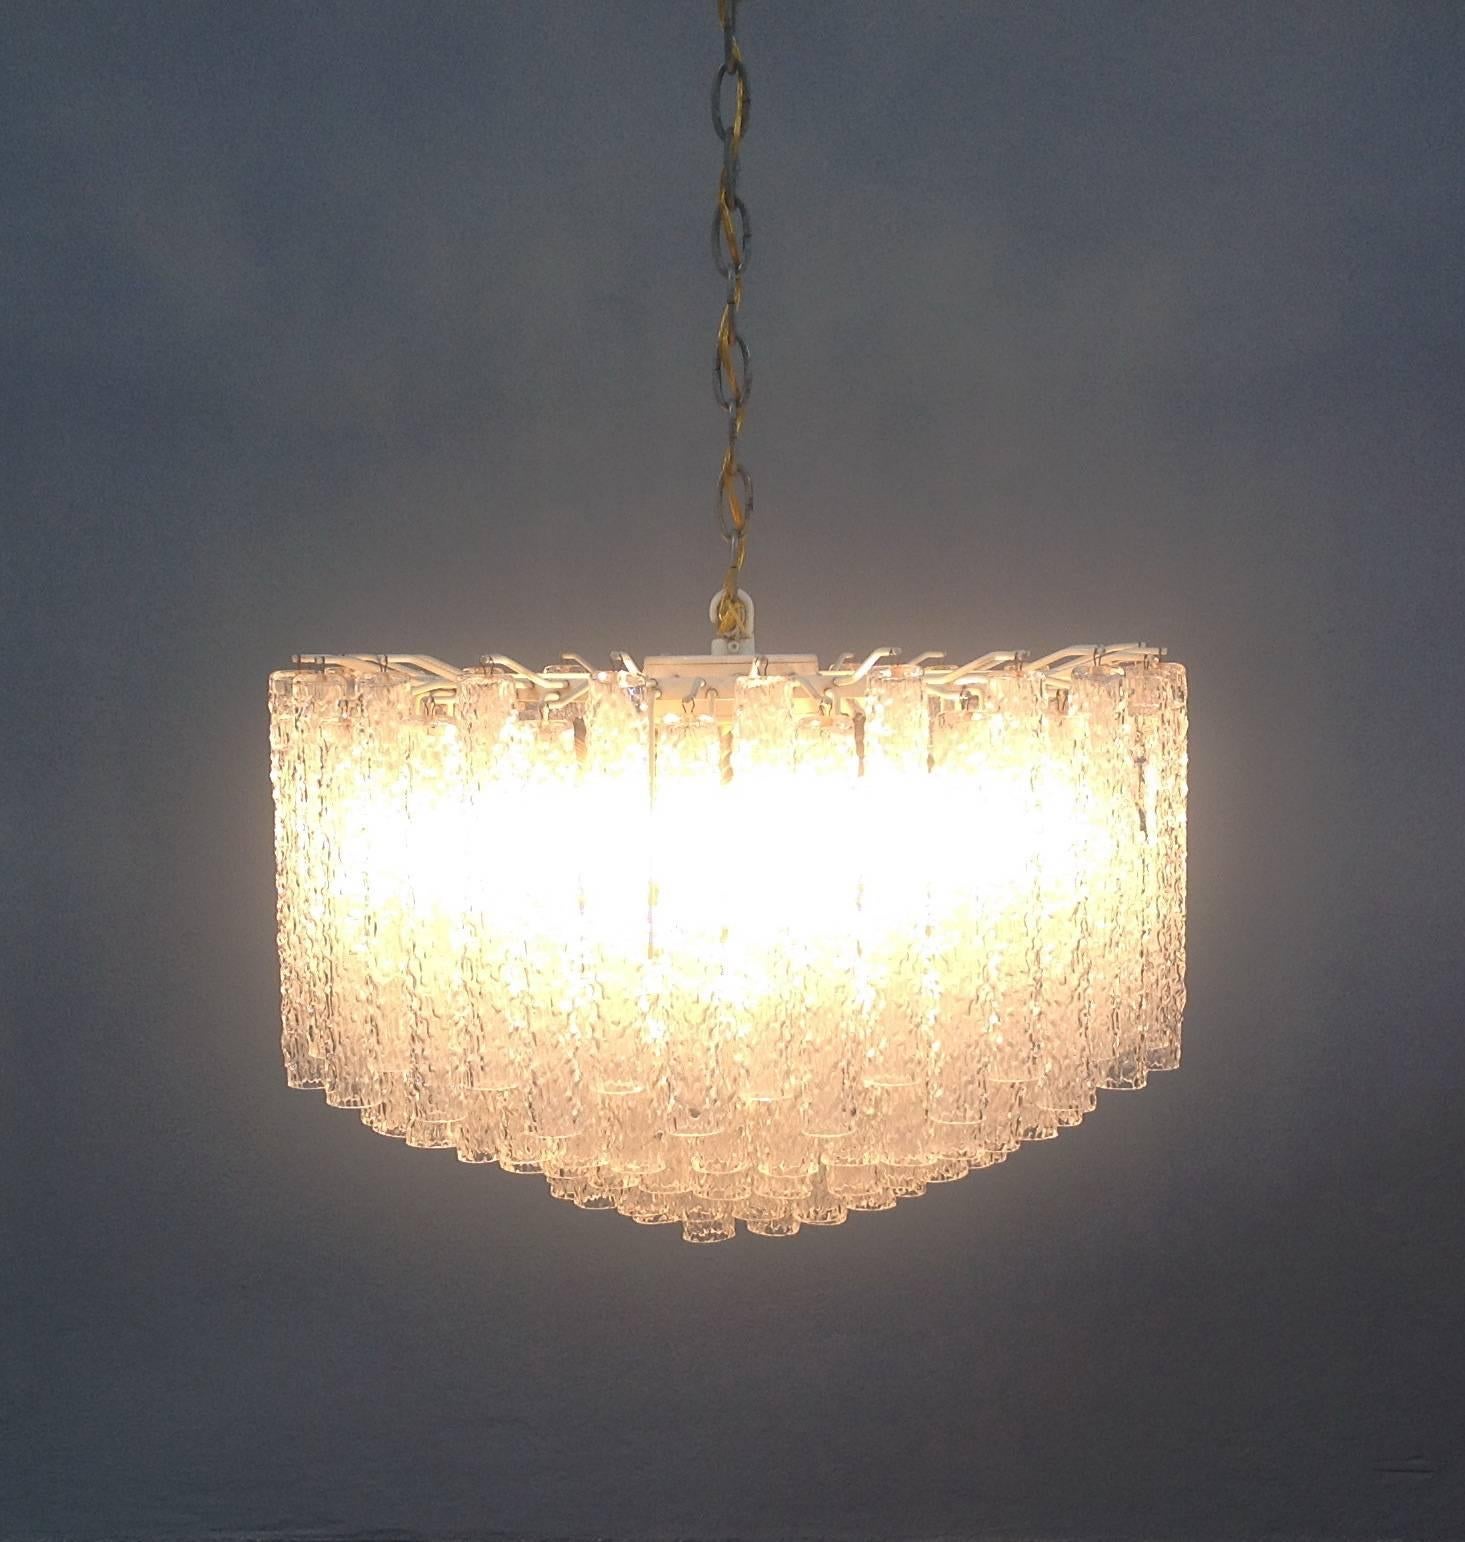 Elegant shape and perfect conditions for this stunning chandelier signed Venini.
Height without chain: 50 cm.